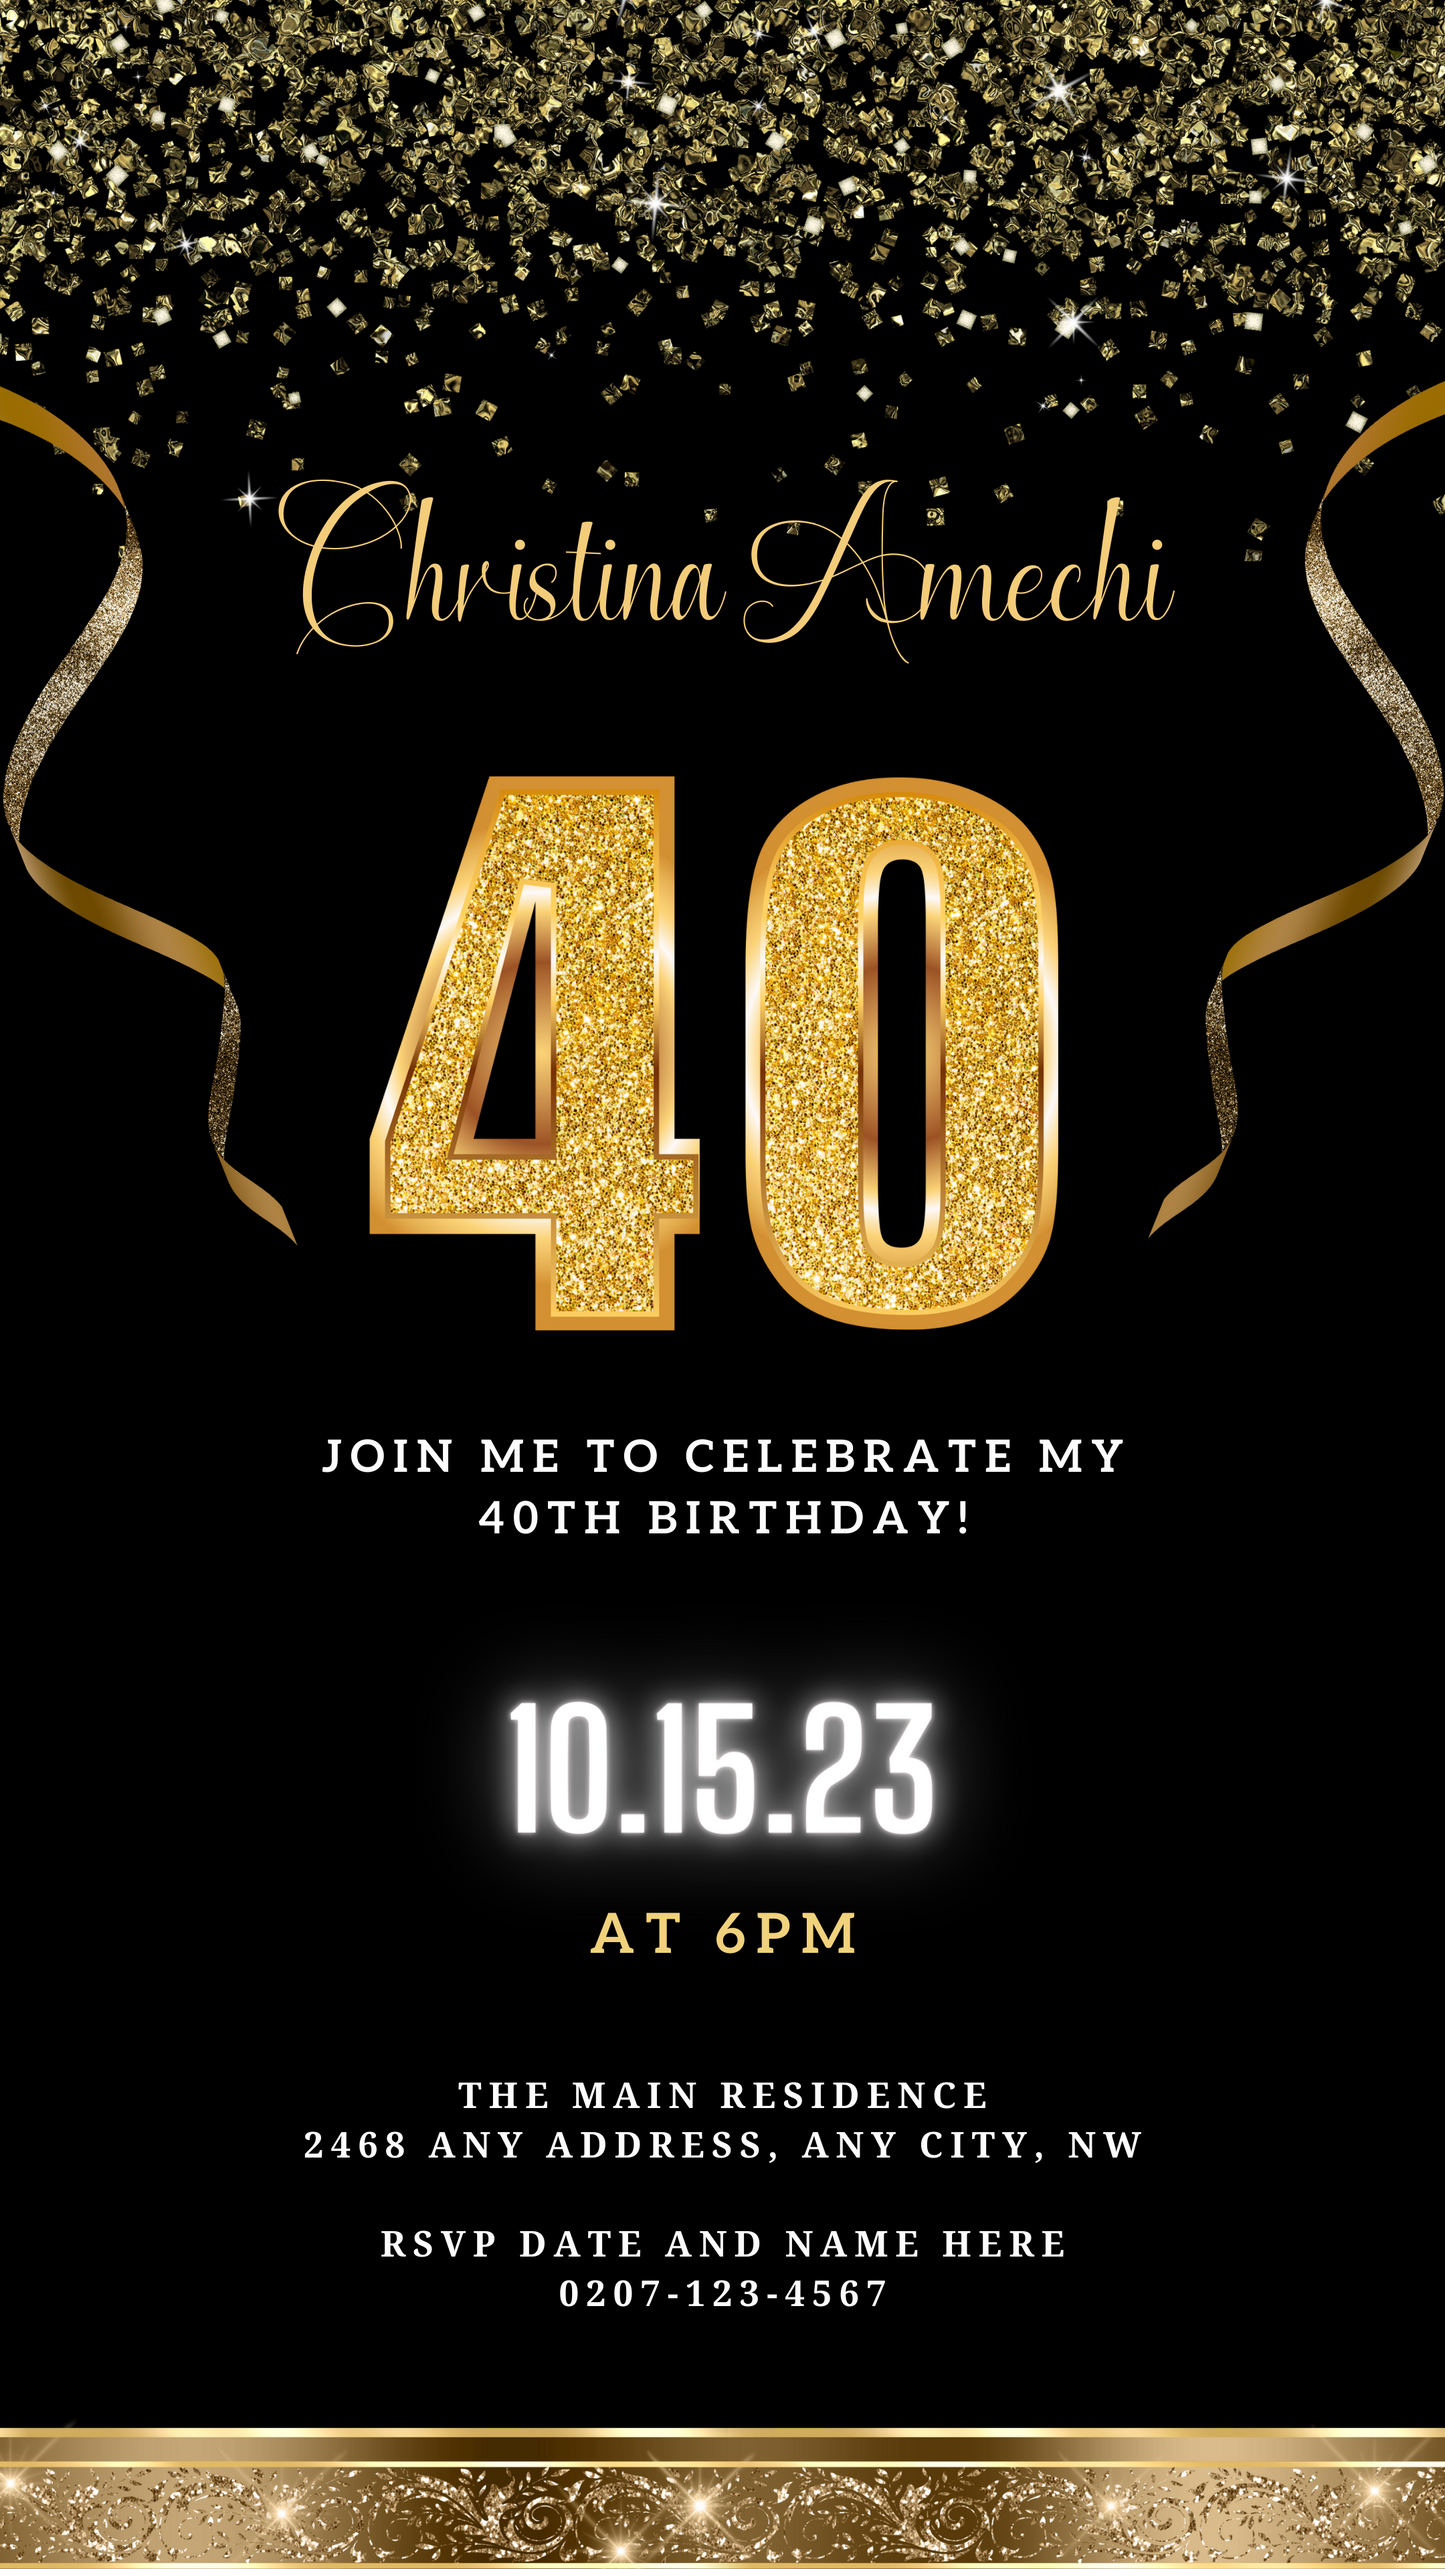 Black Gold Confetti | 40th Birthday Evite with customizable text, gold ribbons, and confetti, perfect for digital invitations via smartphone using Canva.